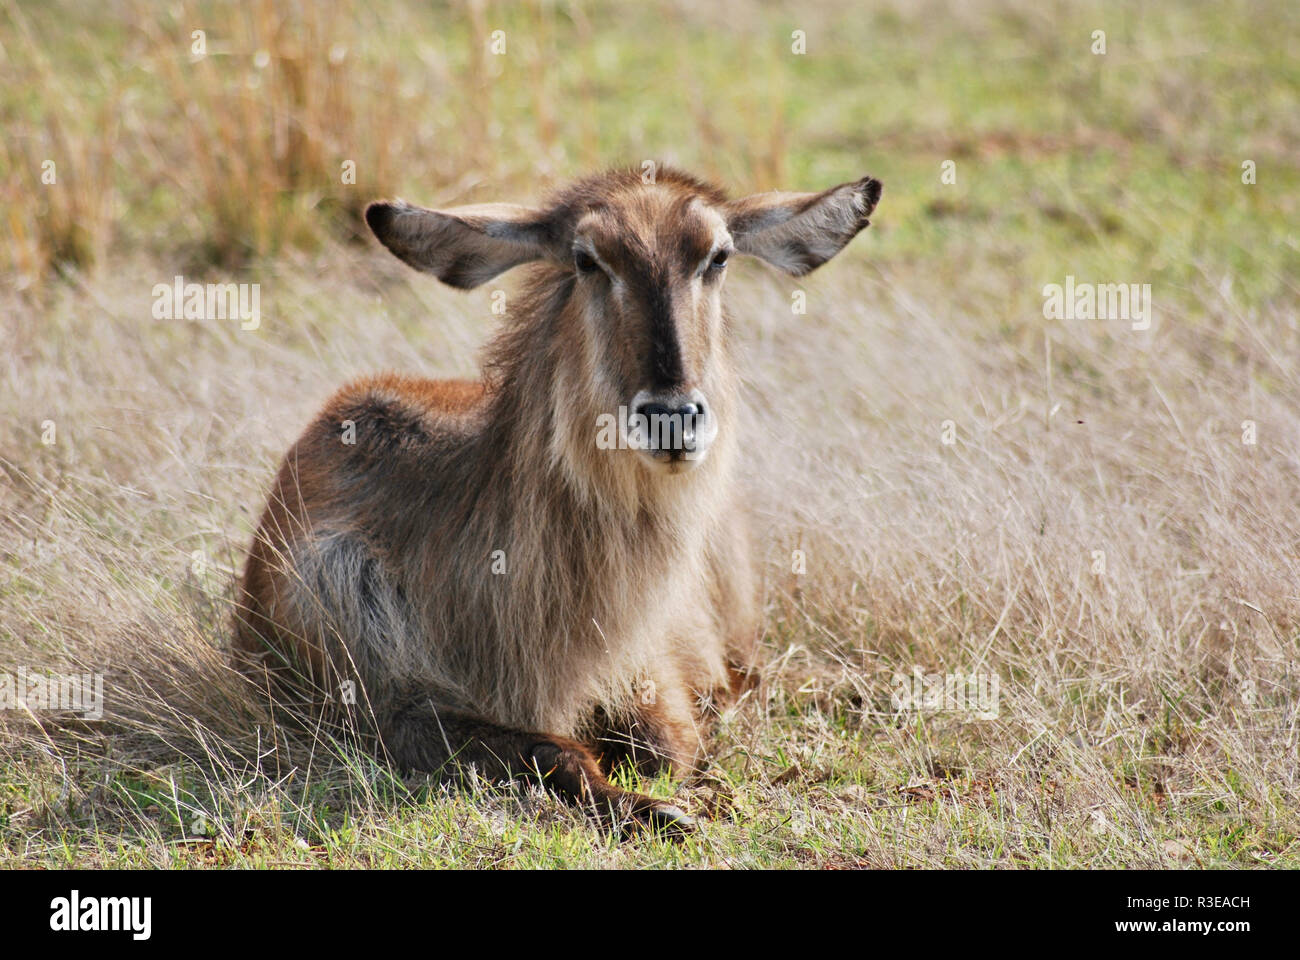 Antelope in South Africa. The Waterbuck (Kobus ellipsiprymnus) is the largest of the kob antelopes. Stock Photo